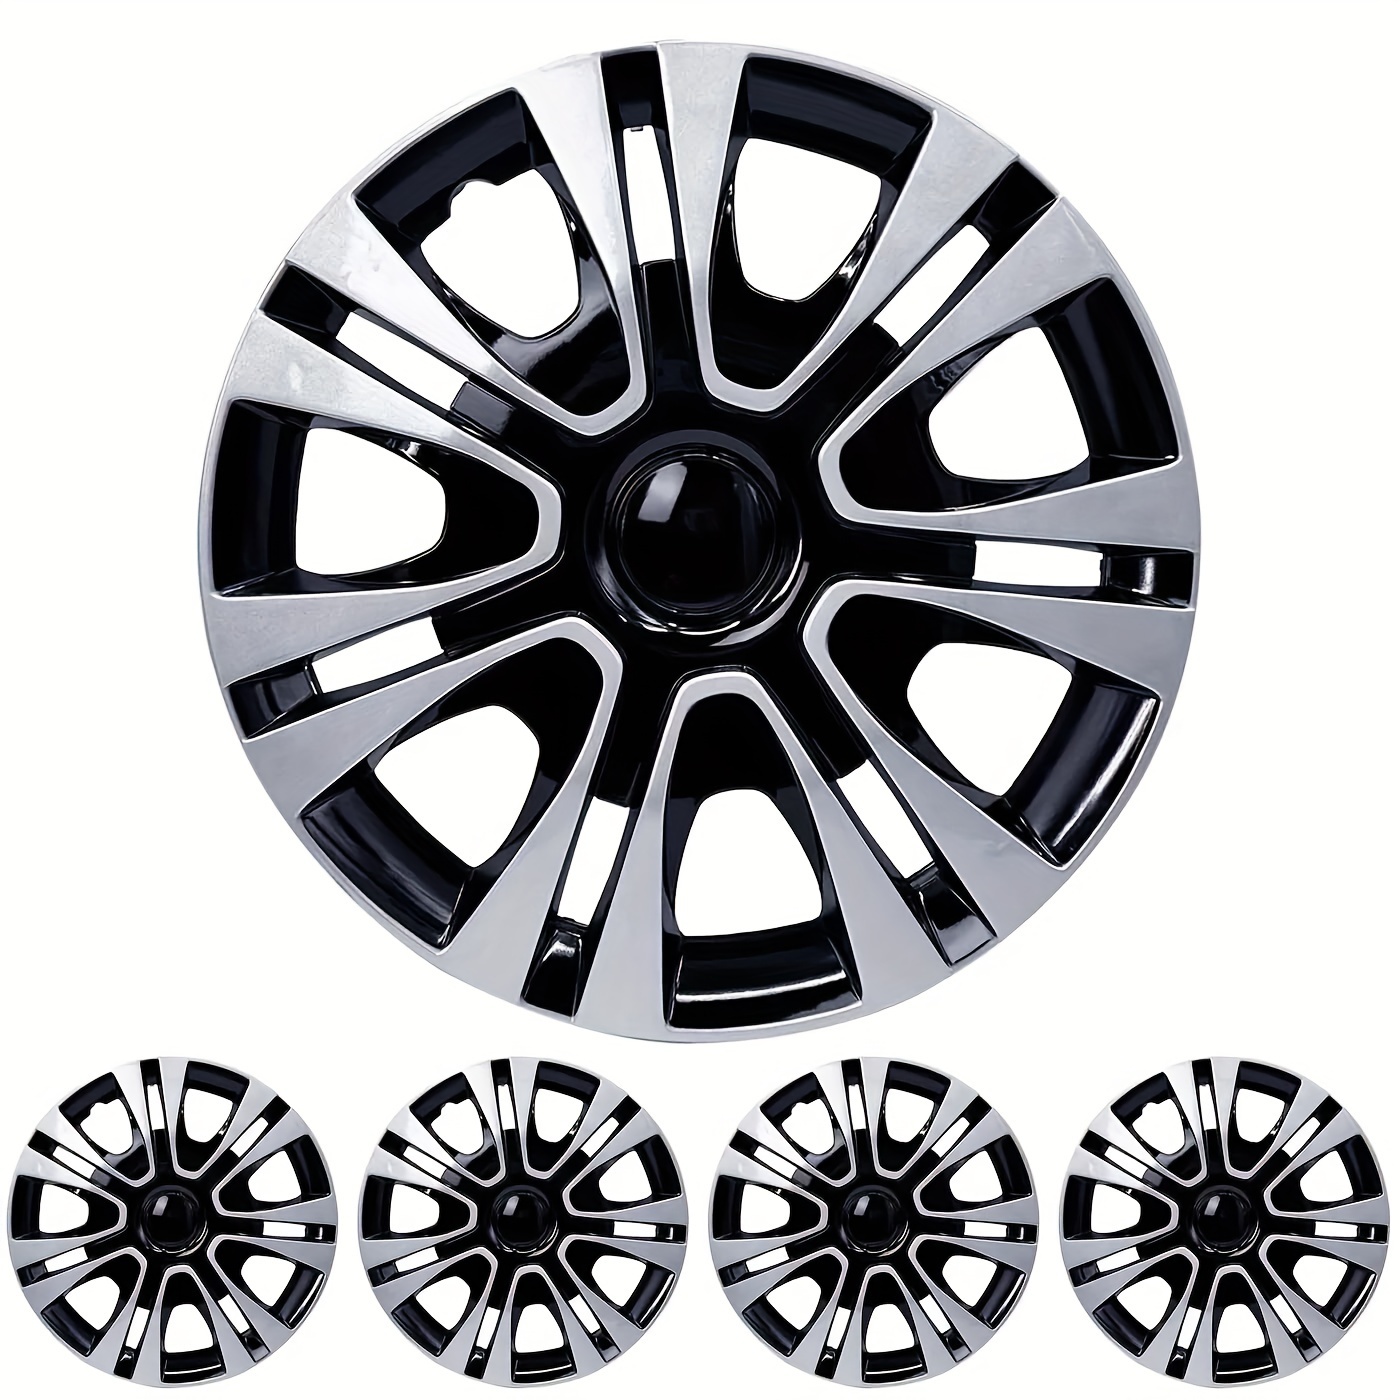 

15" Set Of 4 Hubcaps Wheel Covers Snap On Full Caps Fit R15 Tire & Steel Rim